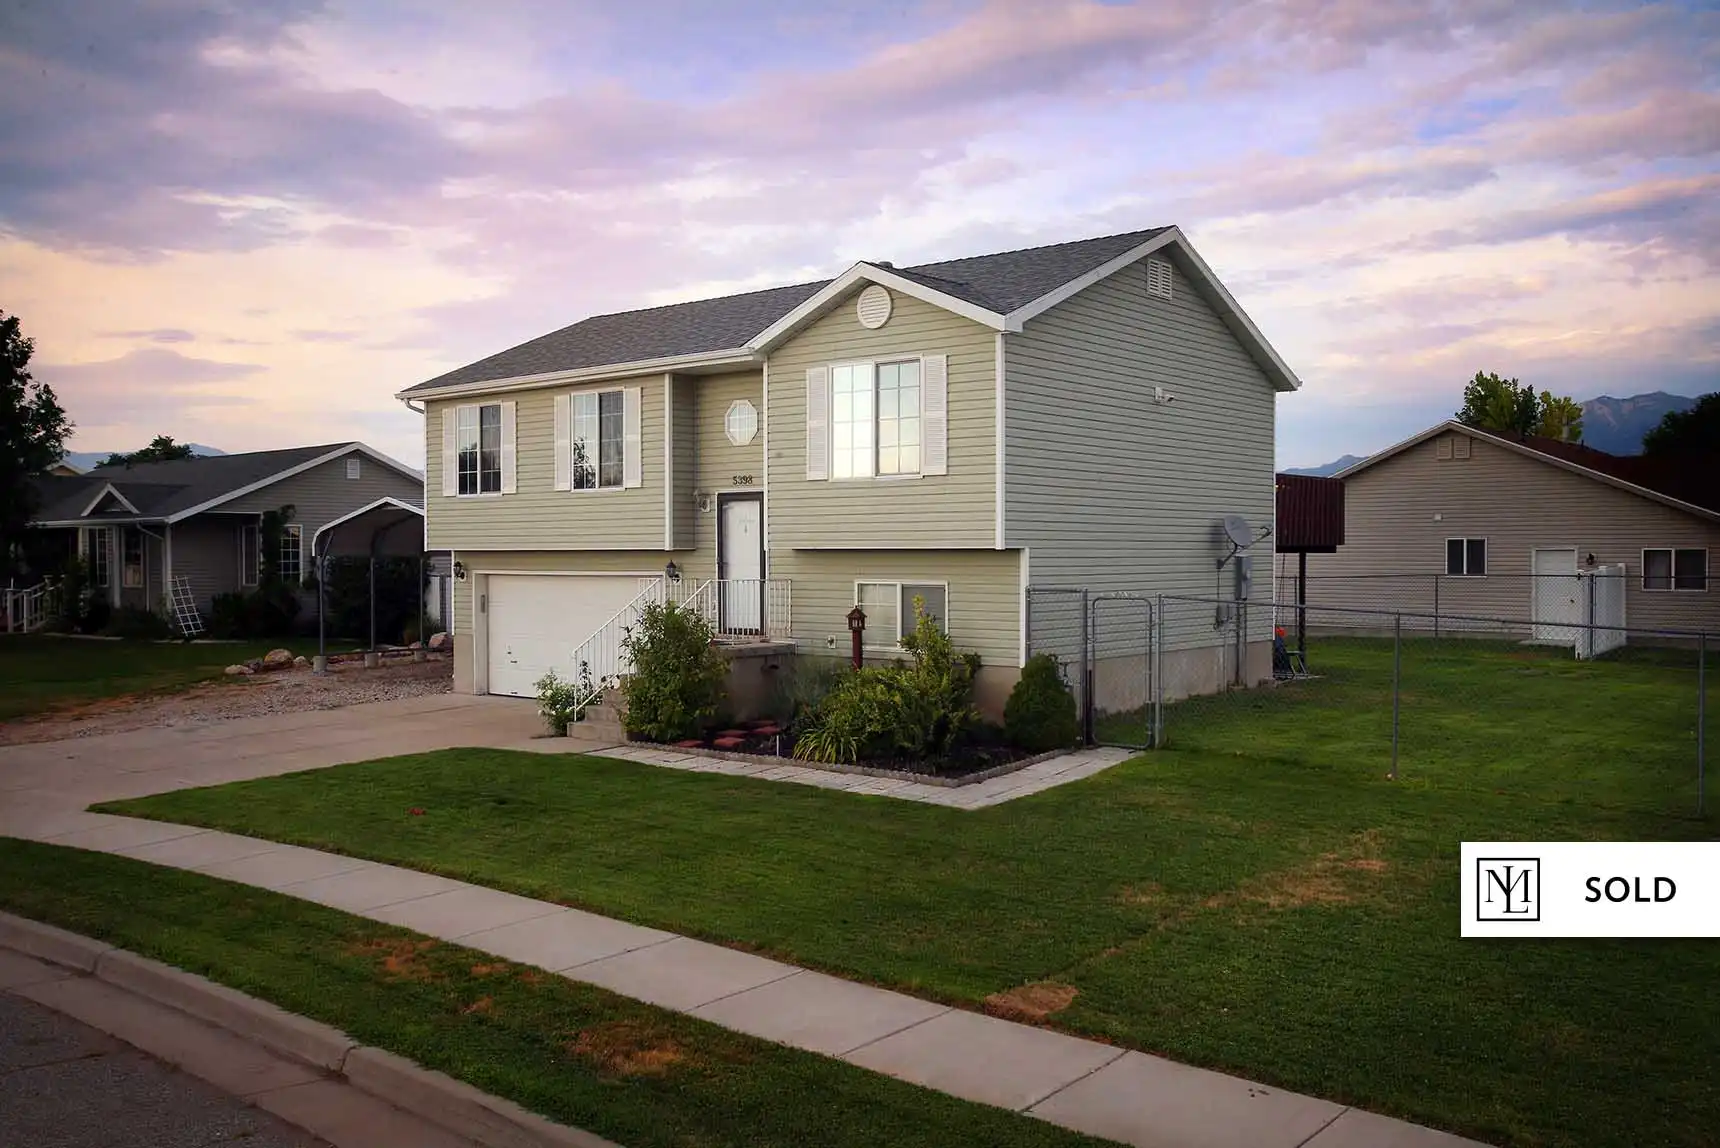 hero image for blog * SOLD * Attractive Home at 5398 S 4150 W Roy UT